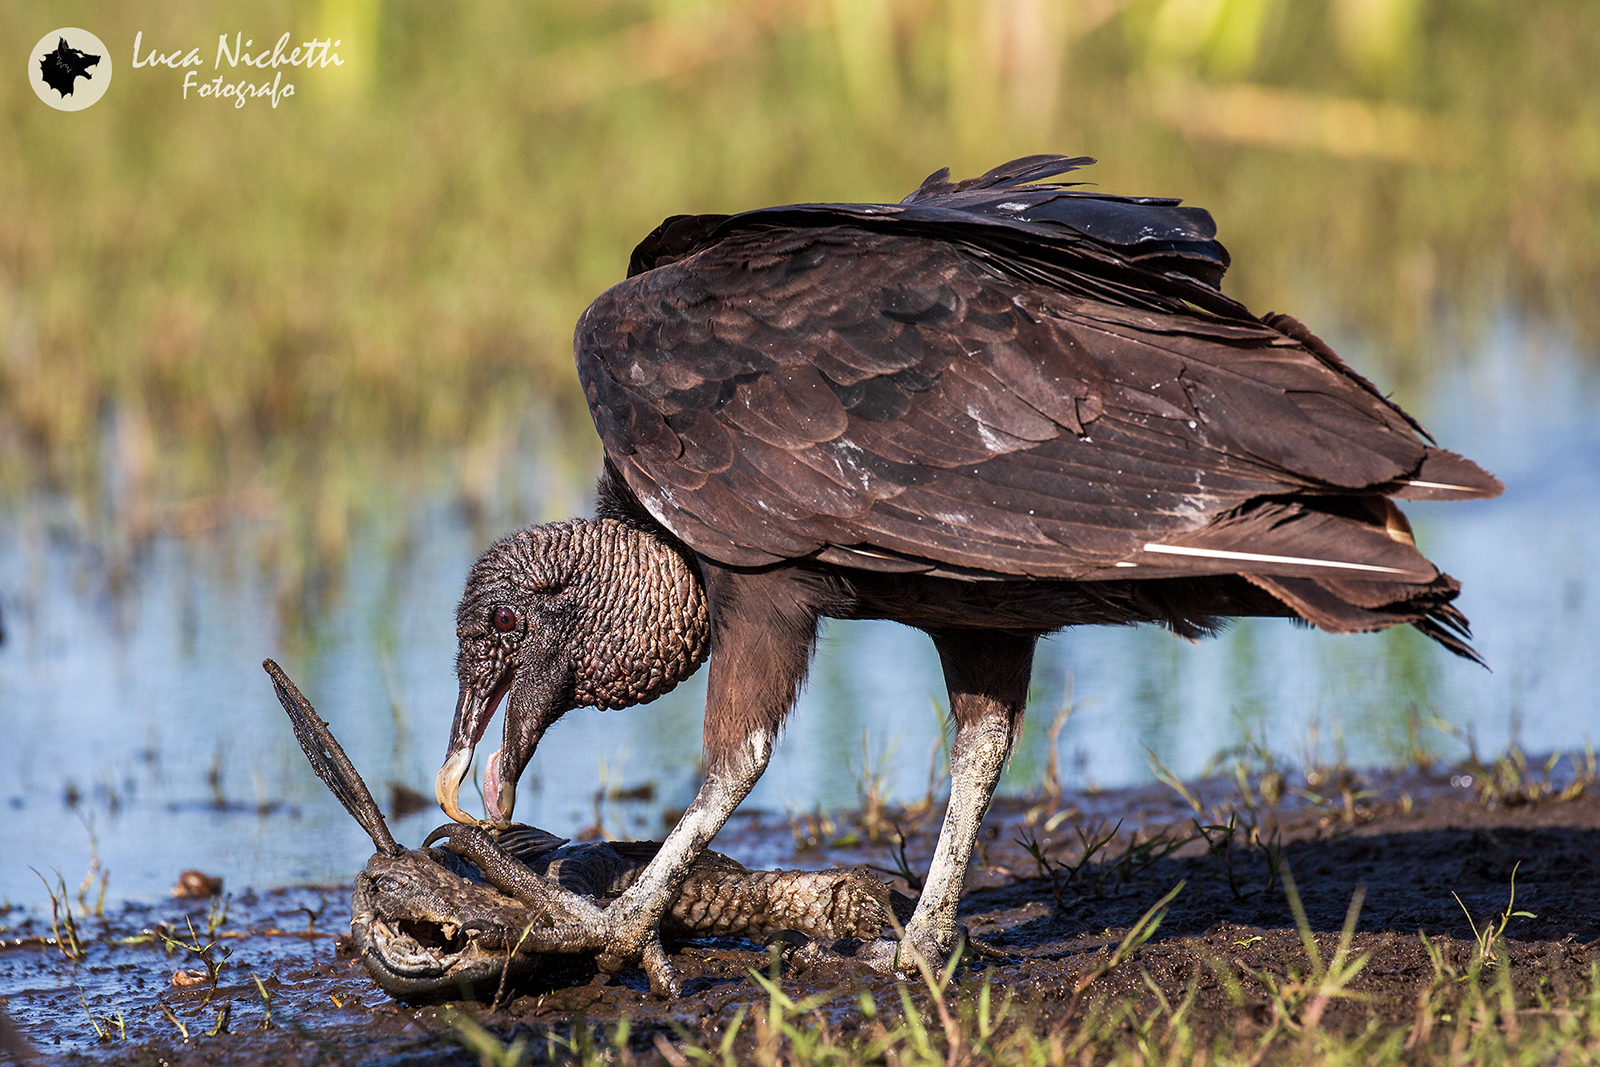 The dinner of the black vulture...